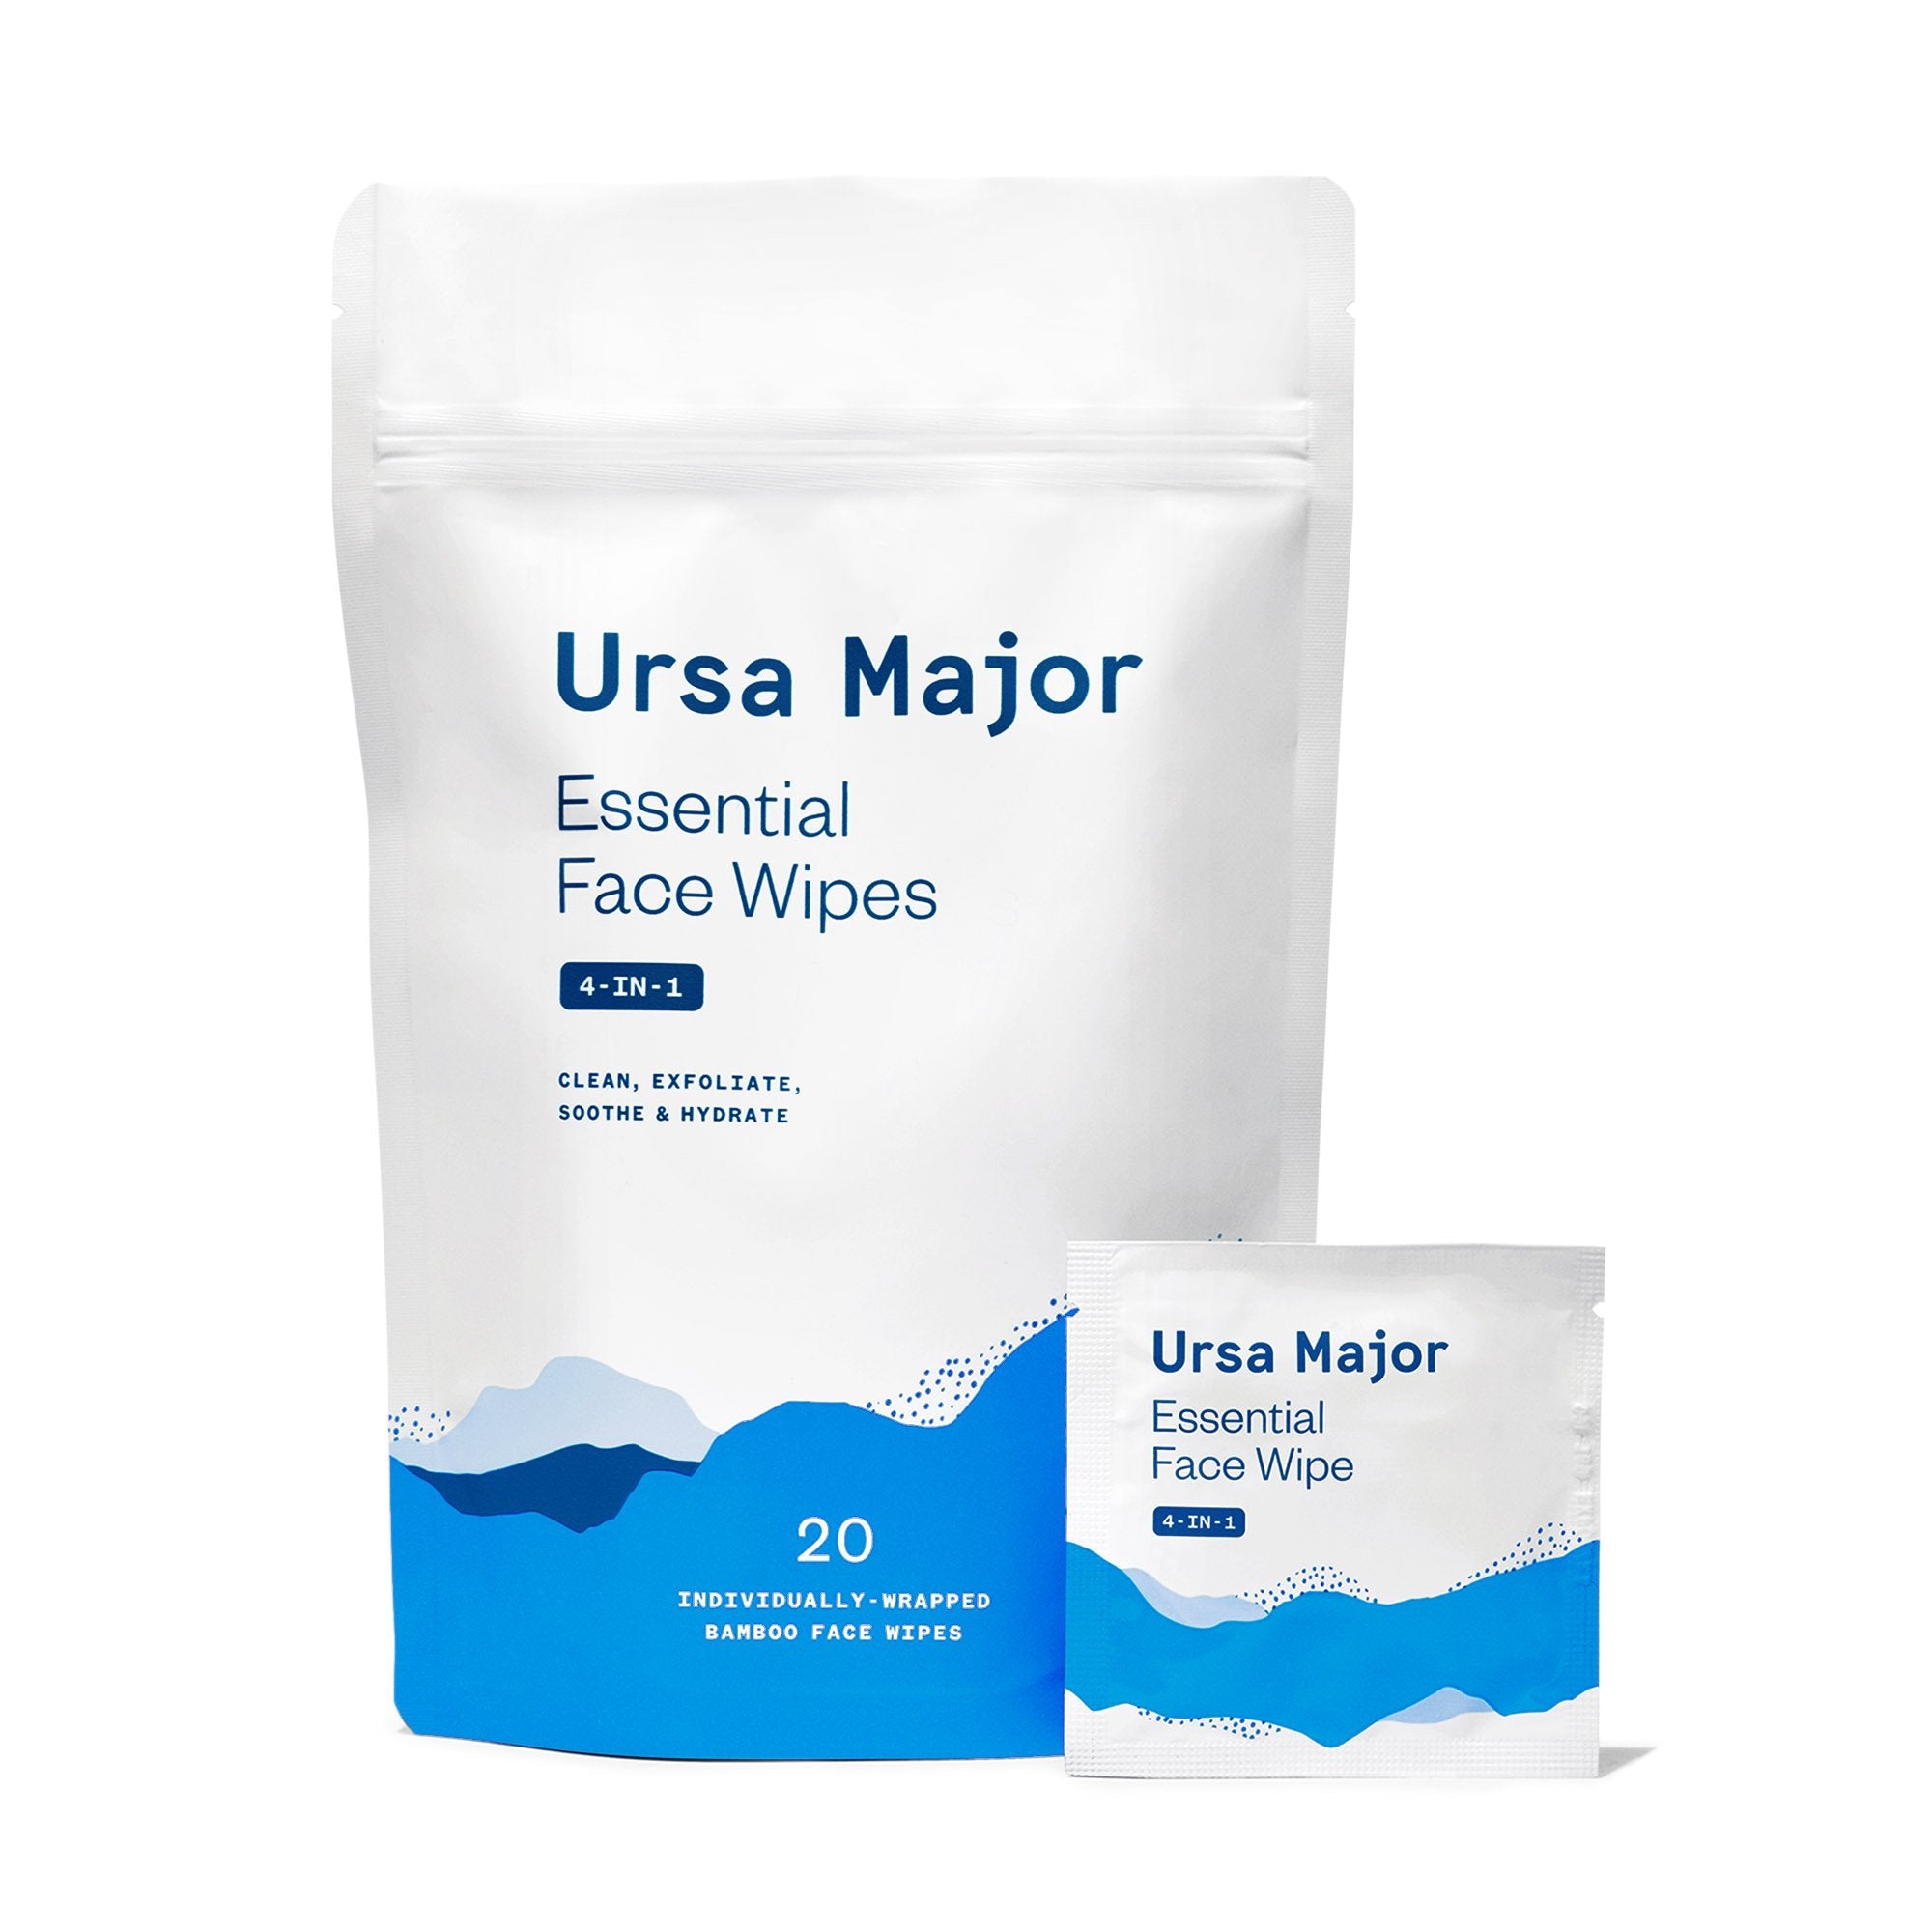 Blue and white packaging for 4-in-1 Essential Face Wipes by Ursa Major Skincare